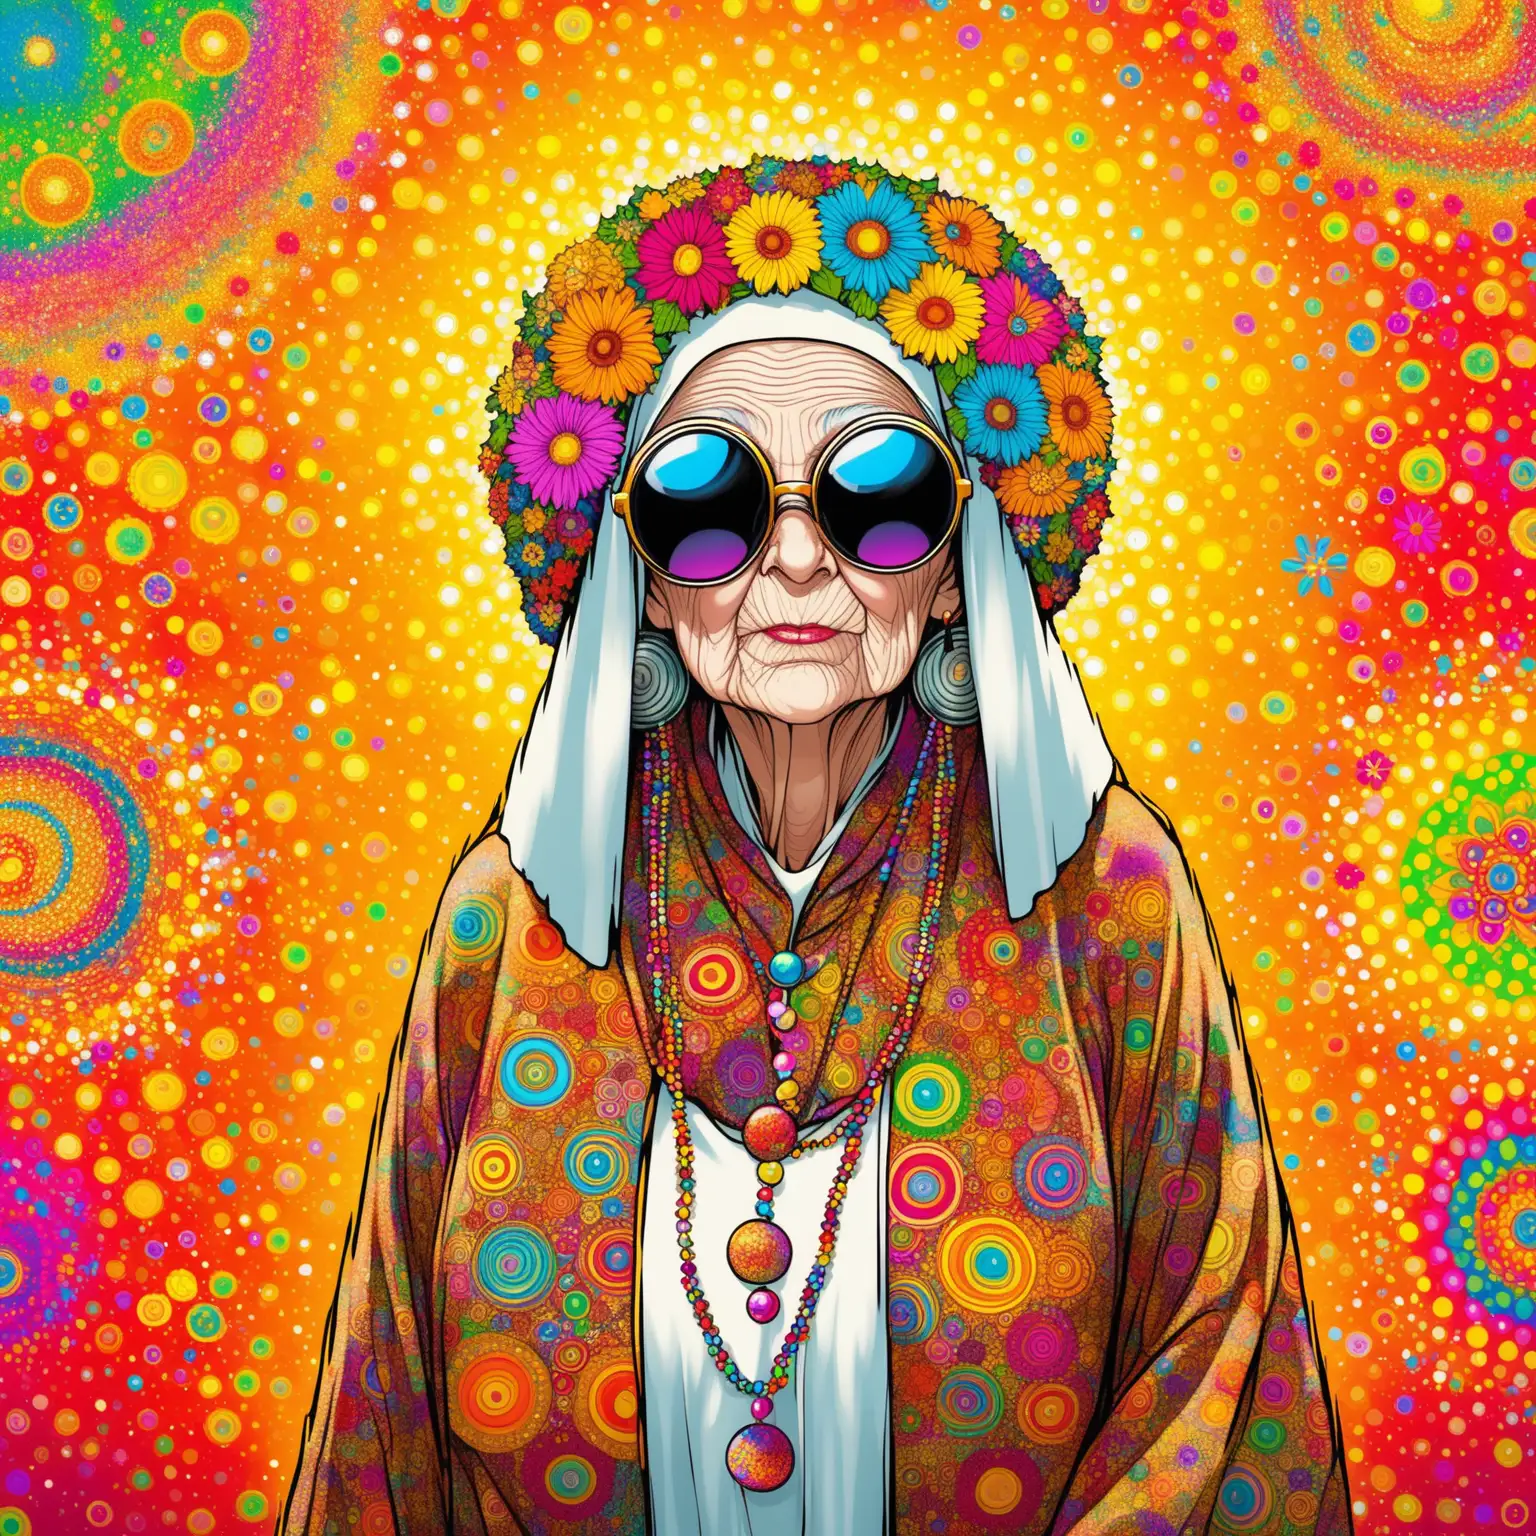 CRAZY  OLD NUN WEARING SUNGLASSES AS A HIPPY WITH PAISLEY PATTERN CLOTHES IN STYLE OF KUSTAZ KLIMT AND JACKSON POLLOCK PSYCHEDELIC, CRAZY BACKGROUND GOLD MESSY,     FLOERS IN HER HAIR BIG HIPPY STYLE, FLOWERS IN HEAR HAIR , SPIRAL SUNGLASSES SUMMER OF LOVE, MORE FLOWERS MORE FLOWERS , ON A BEAH DRINKING COCKTAILS

